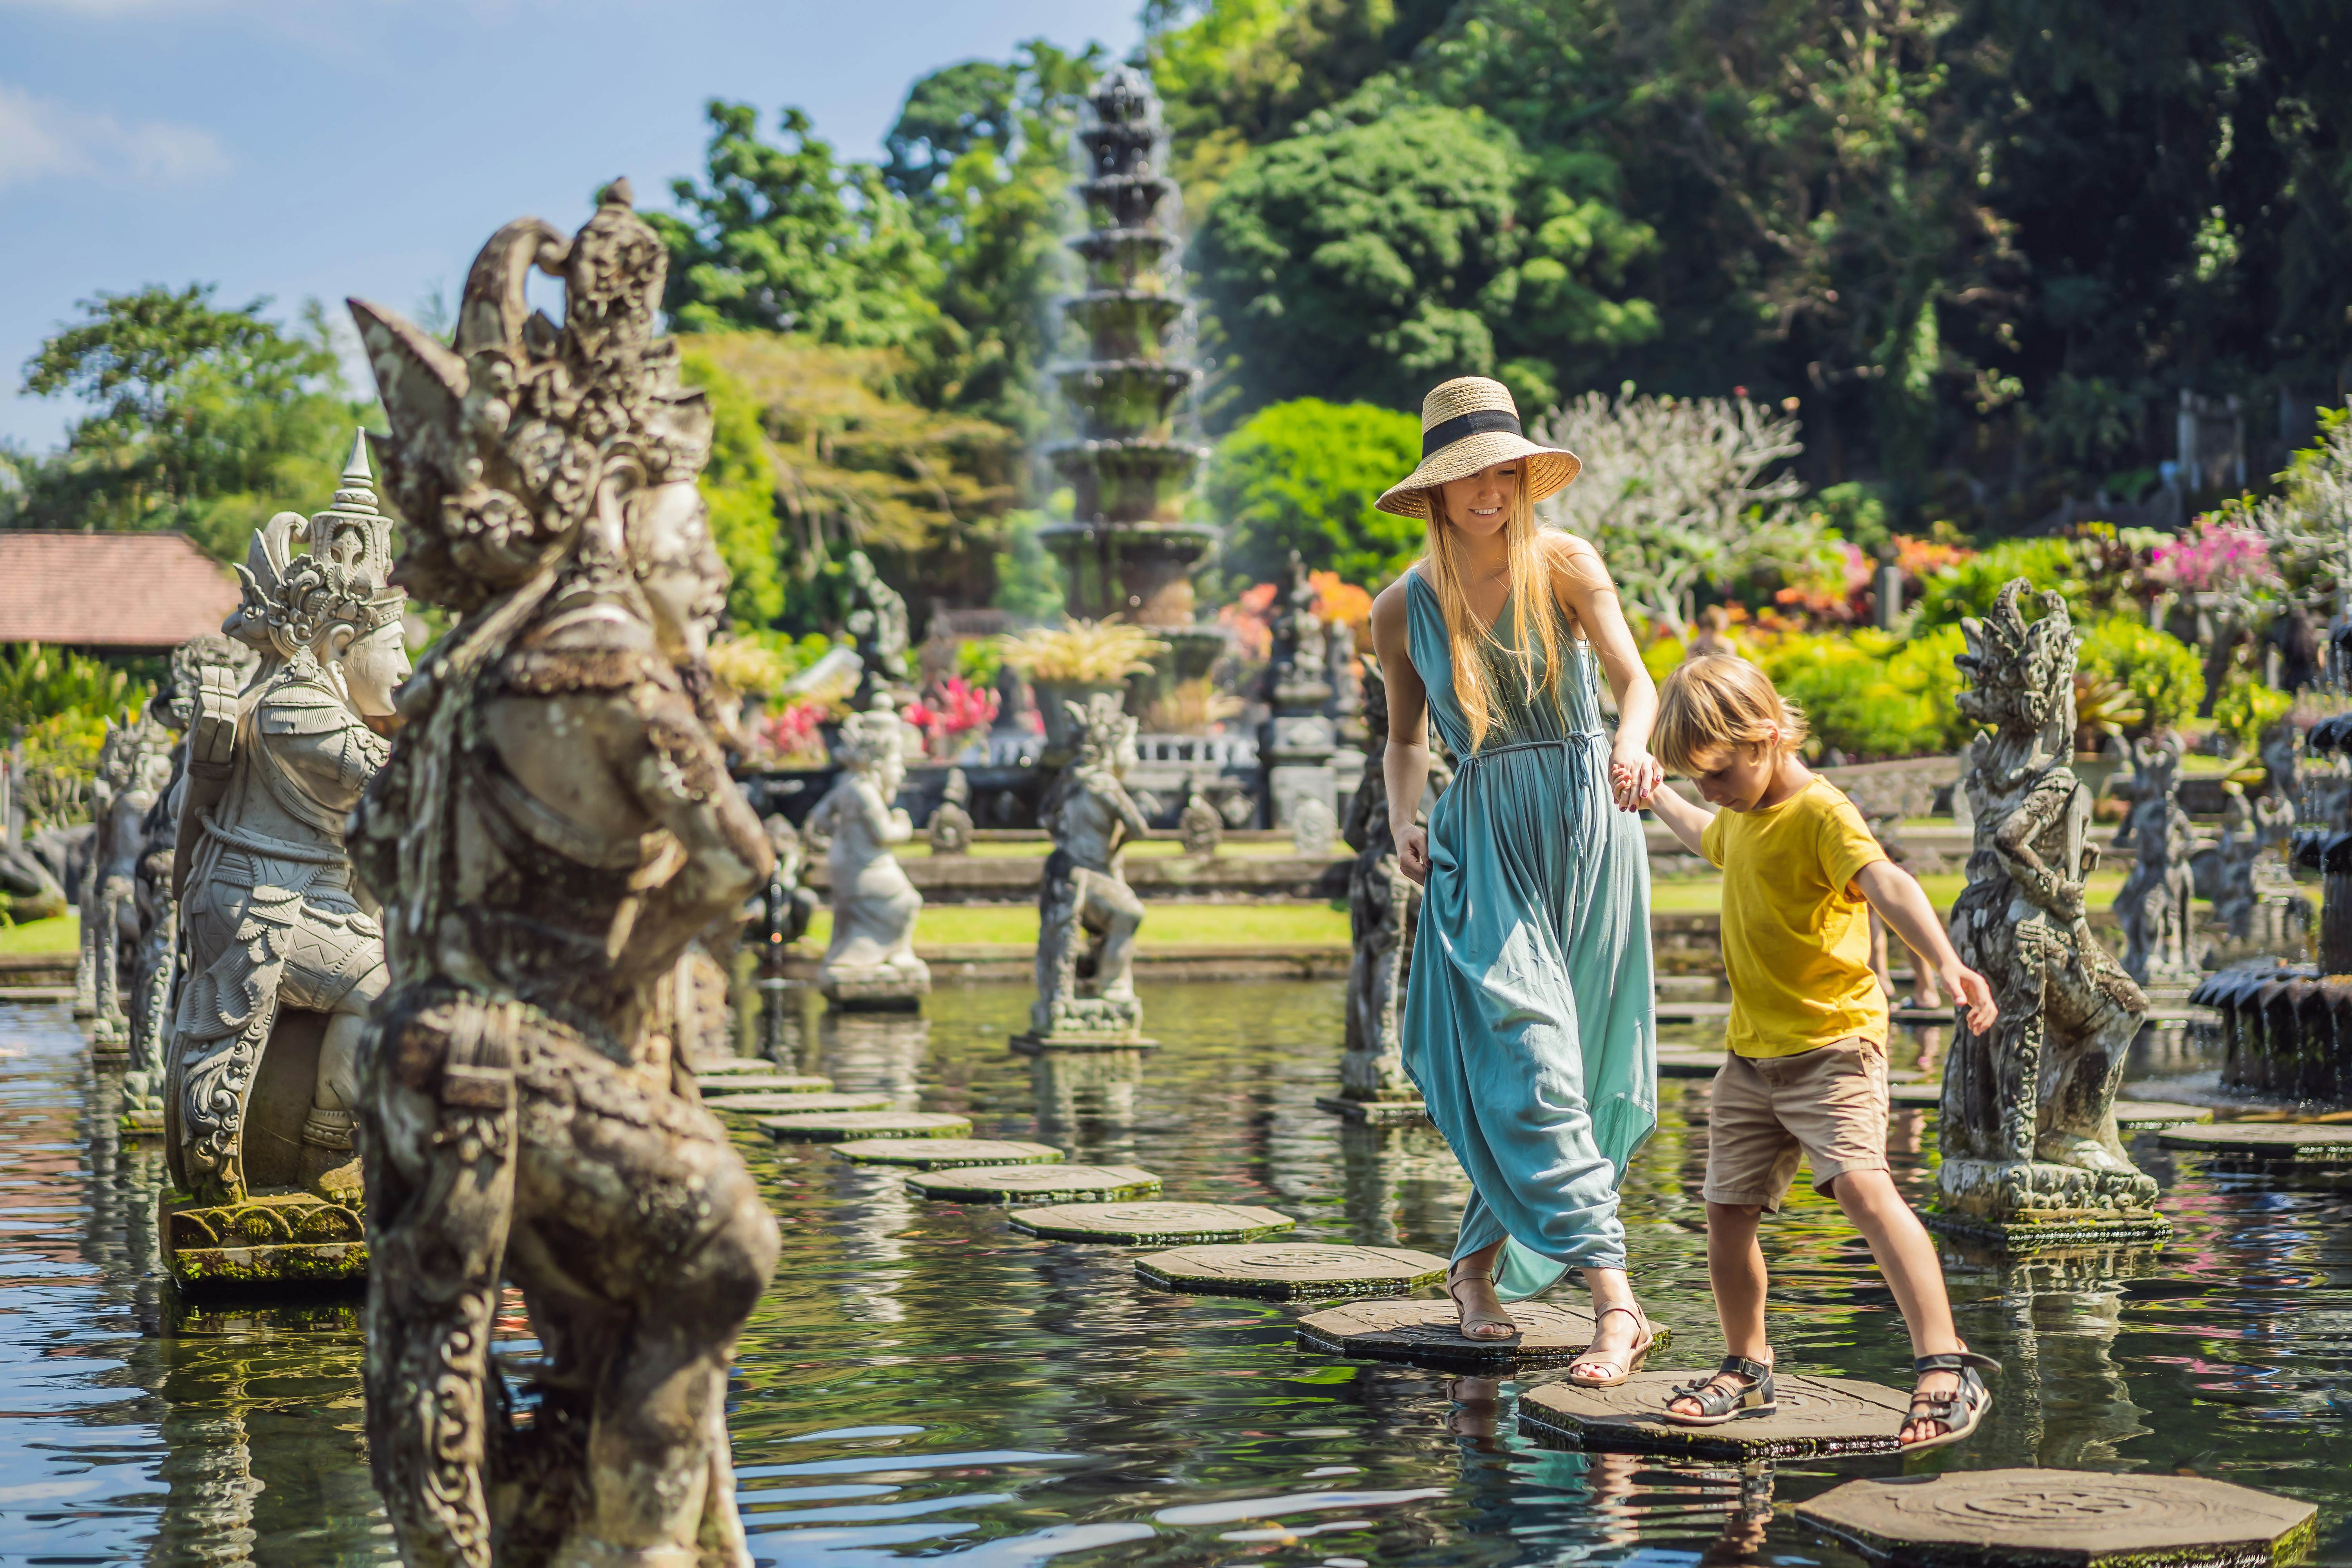 5 Things to Know Before Traveling to Bali